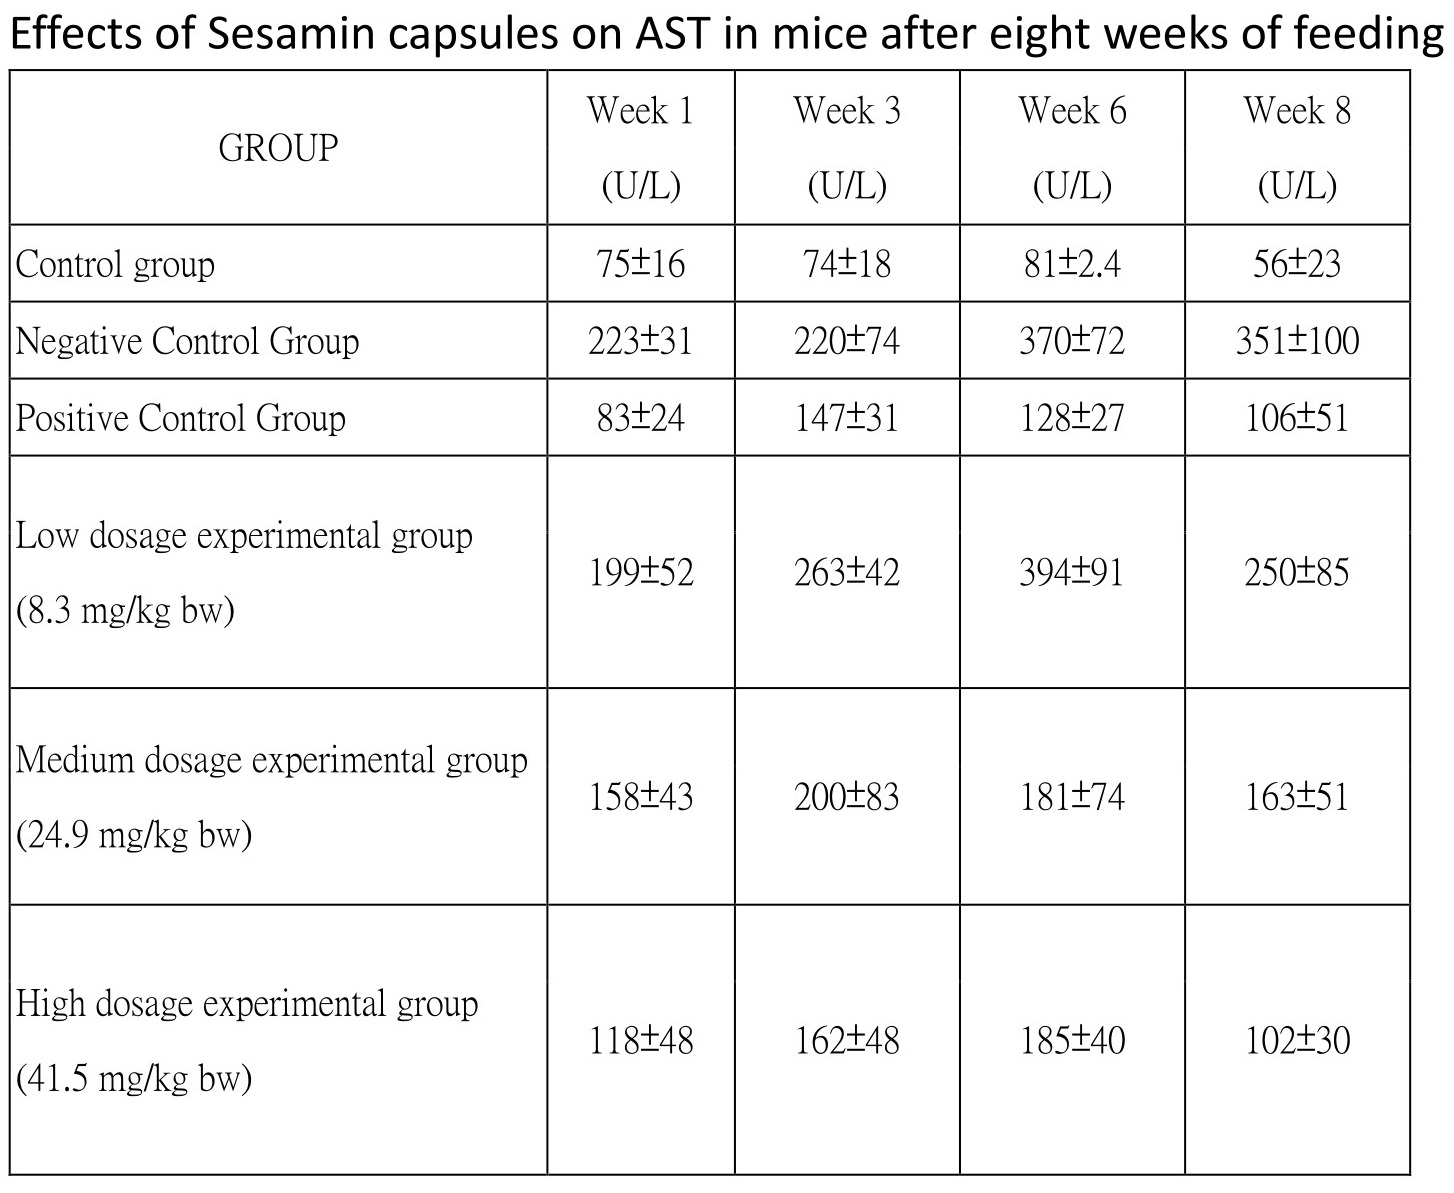 Effects of Sesamin capsules on AST in mice after eight weeks of feeding